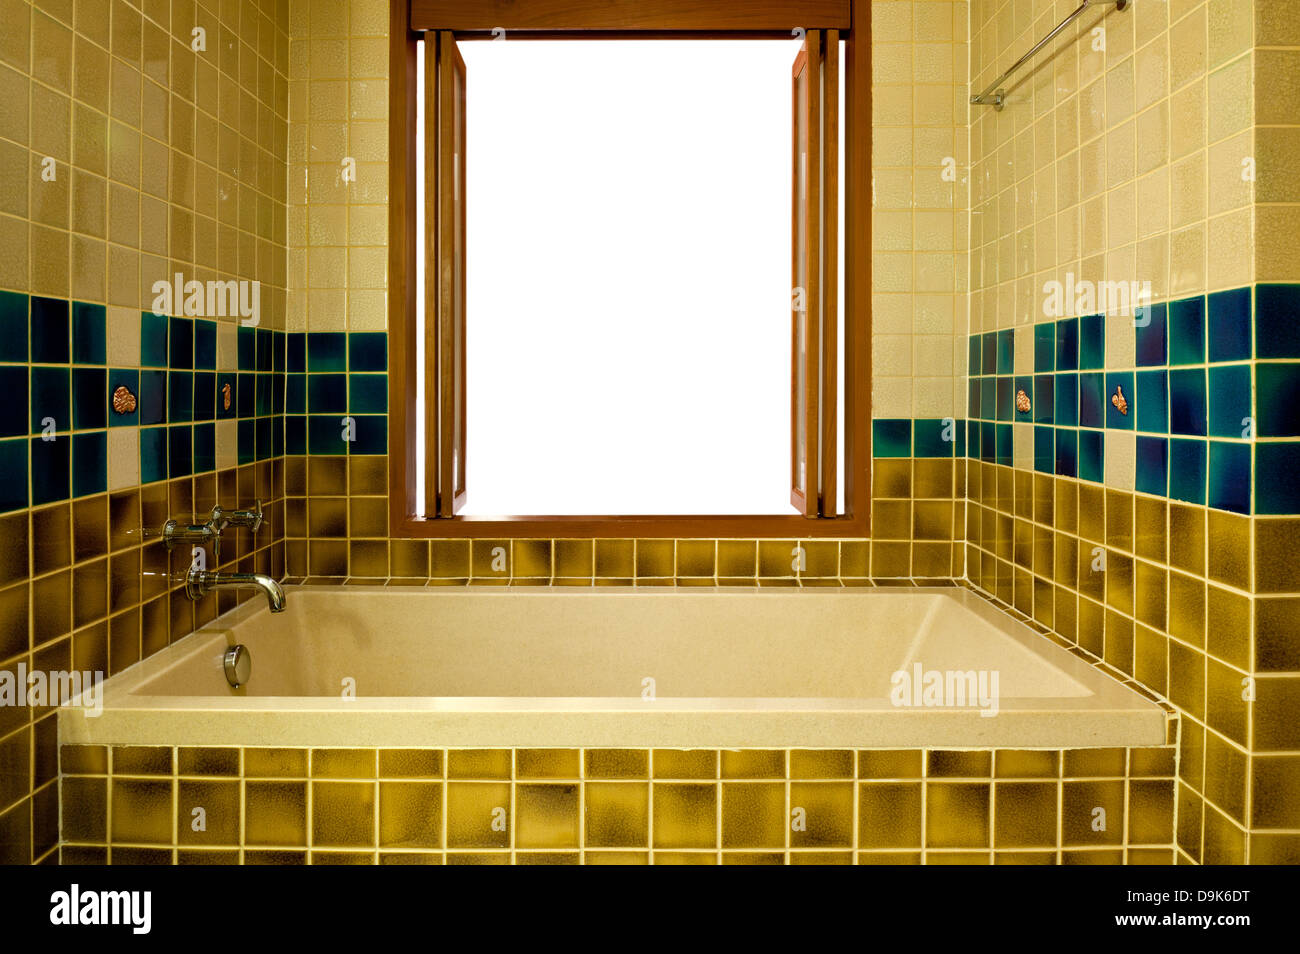 Interior of a bathroom with a bathtub and open window Stock Photo